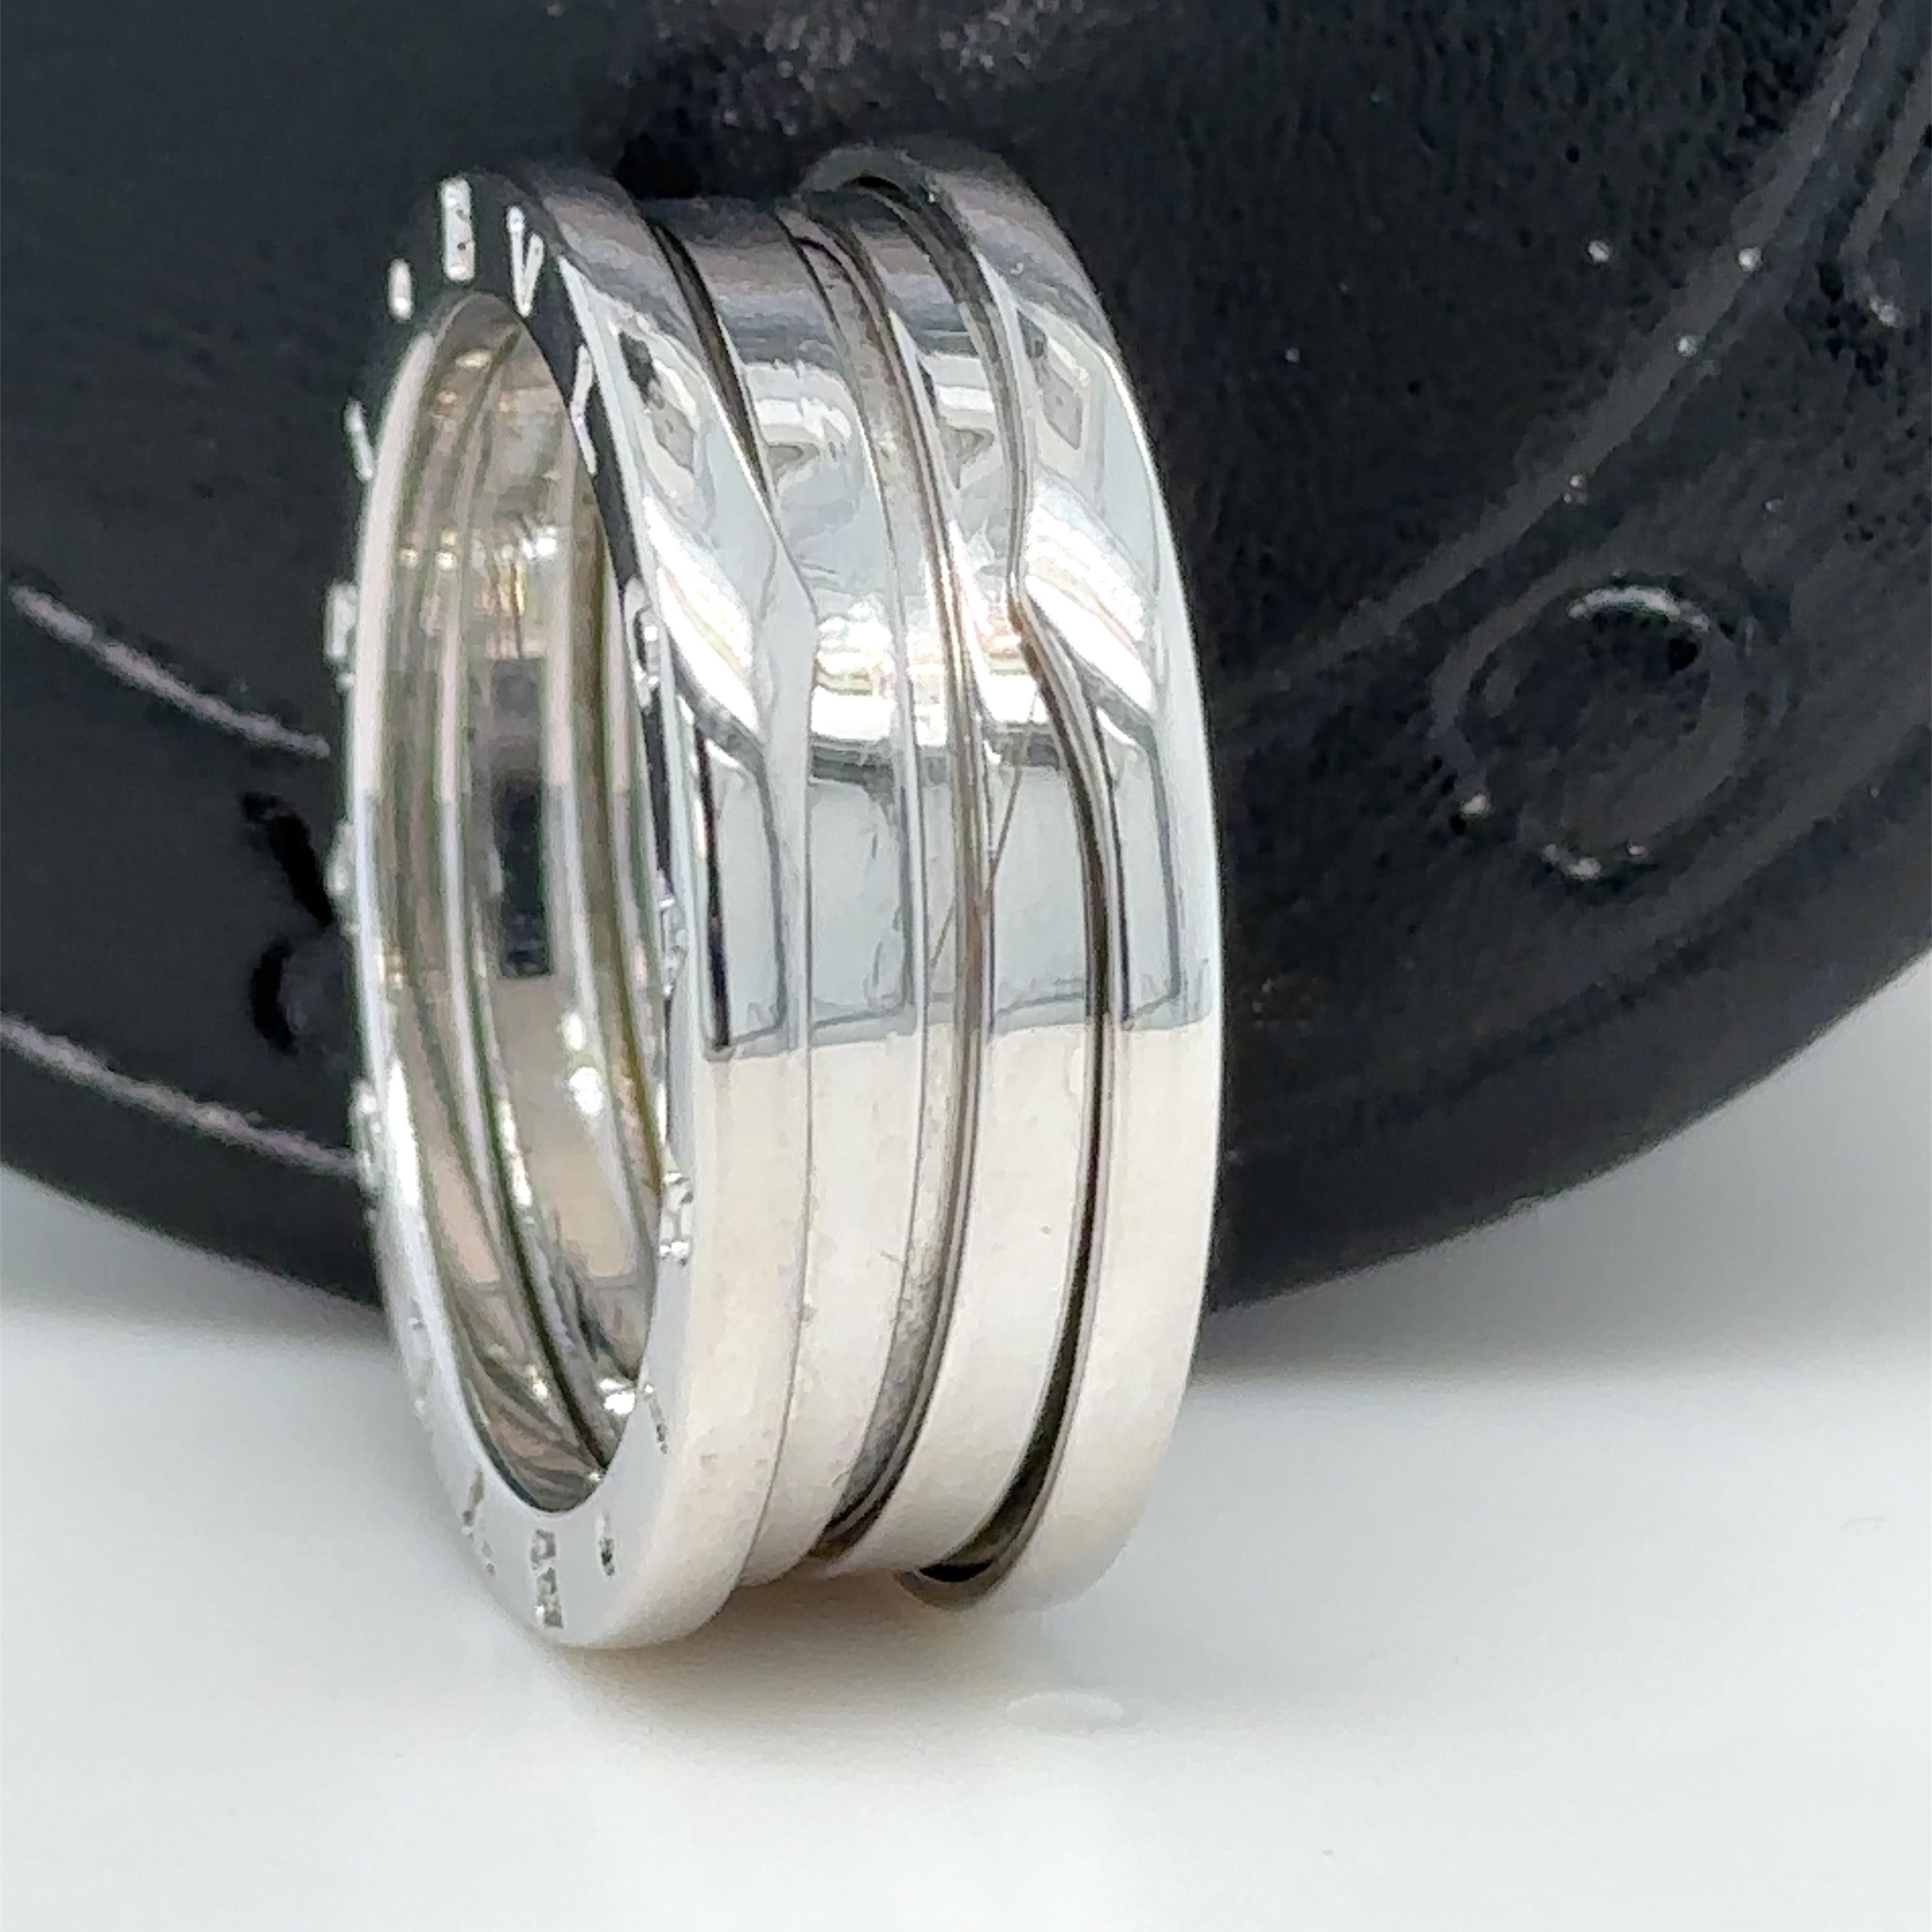 A Bvlgari Ring

Bvlgari B.ZERO1 three band ring. Made of 18 kt White Gold, ring size 64, and weighing 11.17gm. Stamped: 64 Made in Italy 750 22337AL Bvlgari

Metal: 18k White Gold
Carat: N/A
Colour: N/A
Clarity:  N/A
Cut: N/A
Weight: 11.17